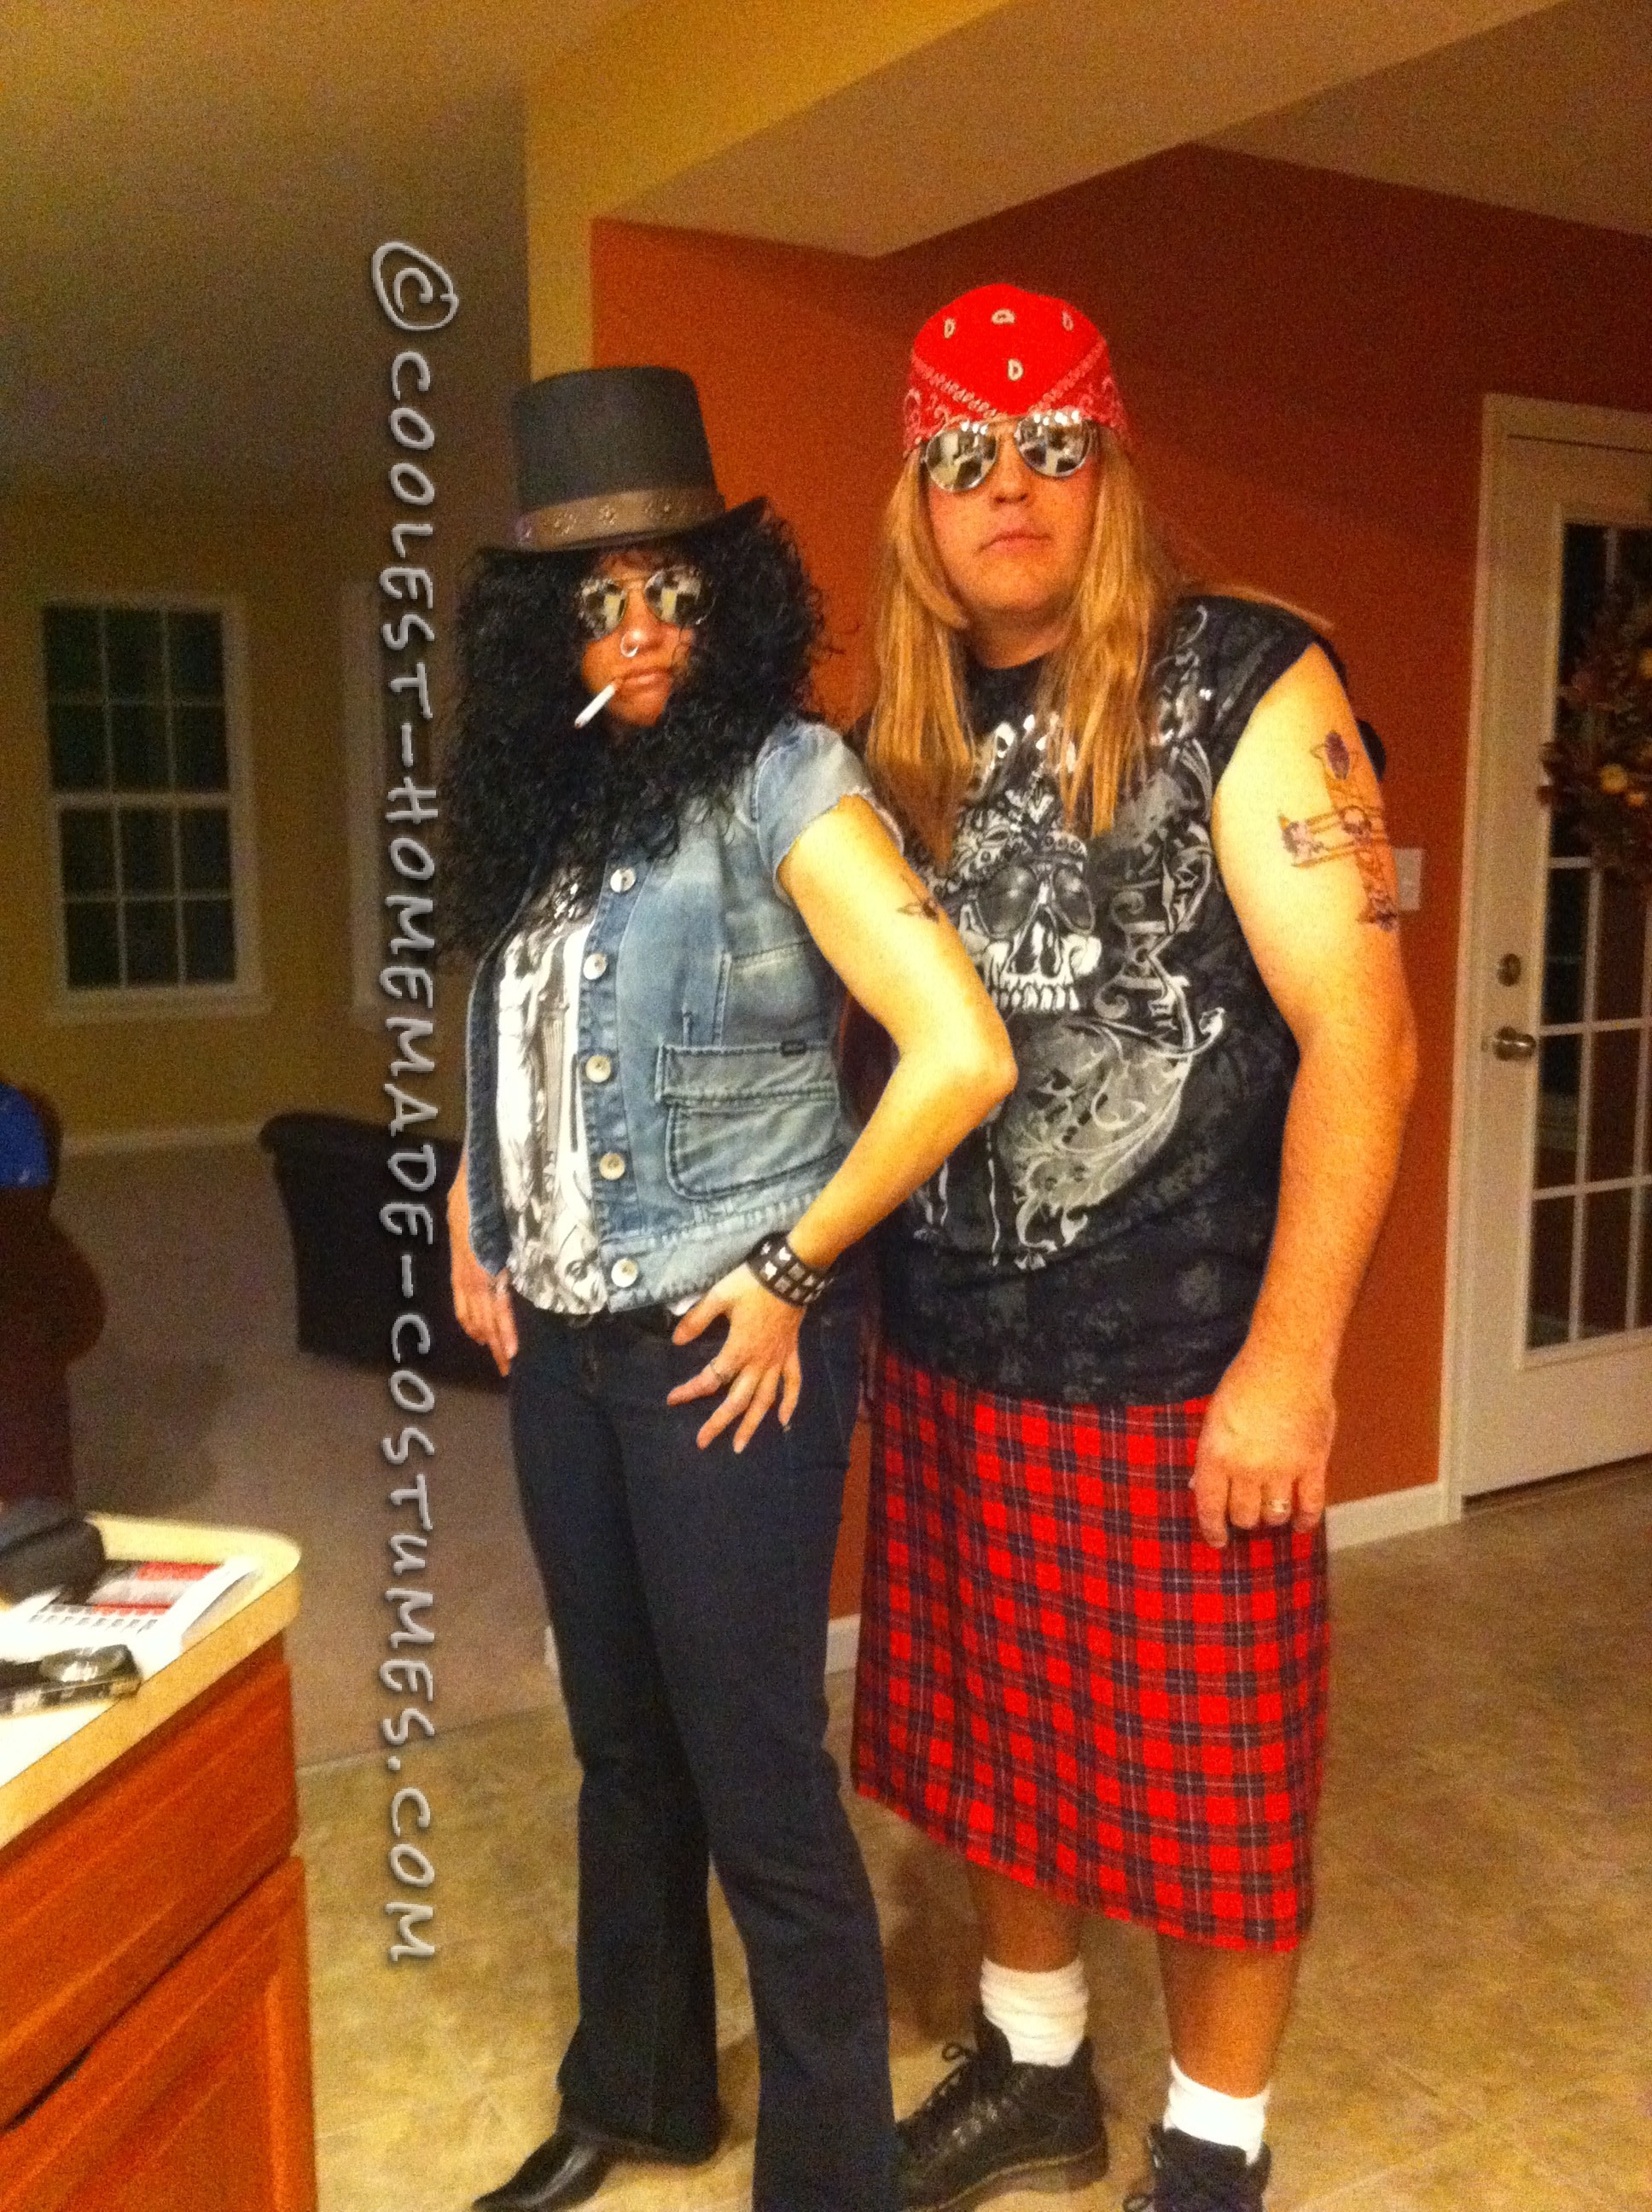 Coolest Homemade Costumes | Coolest Rock Band Costumes